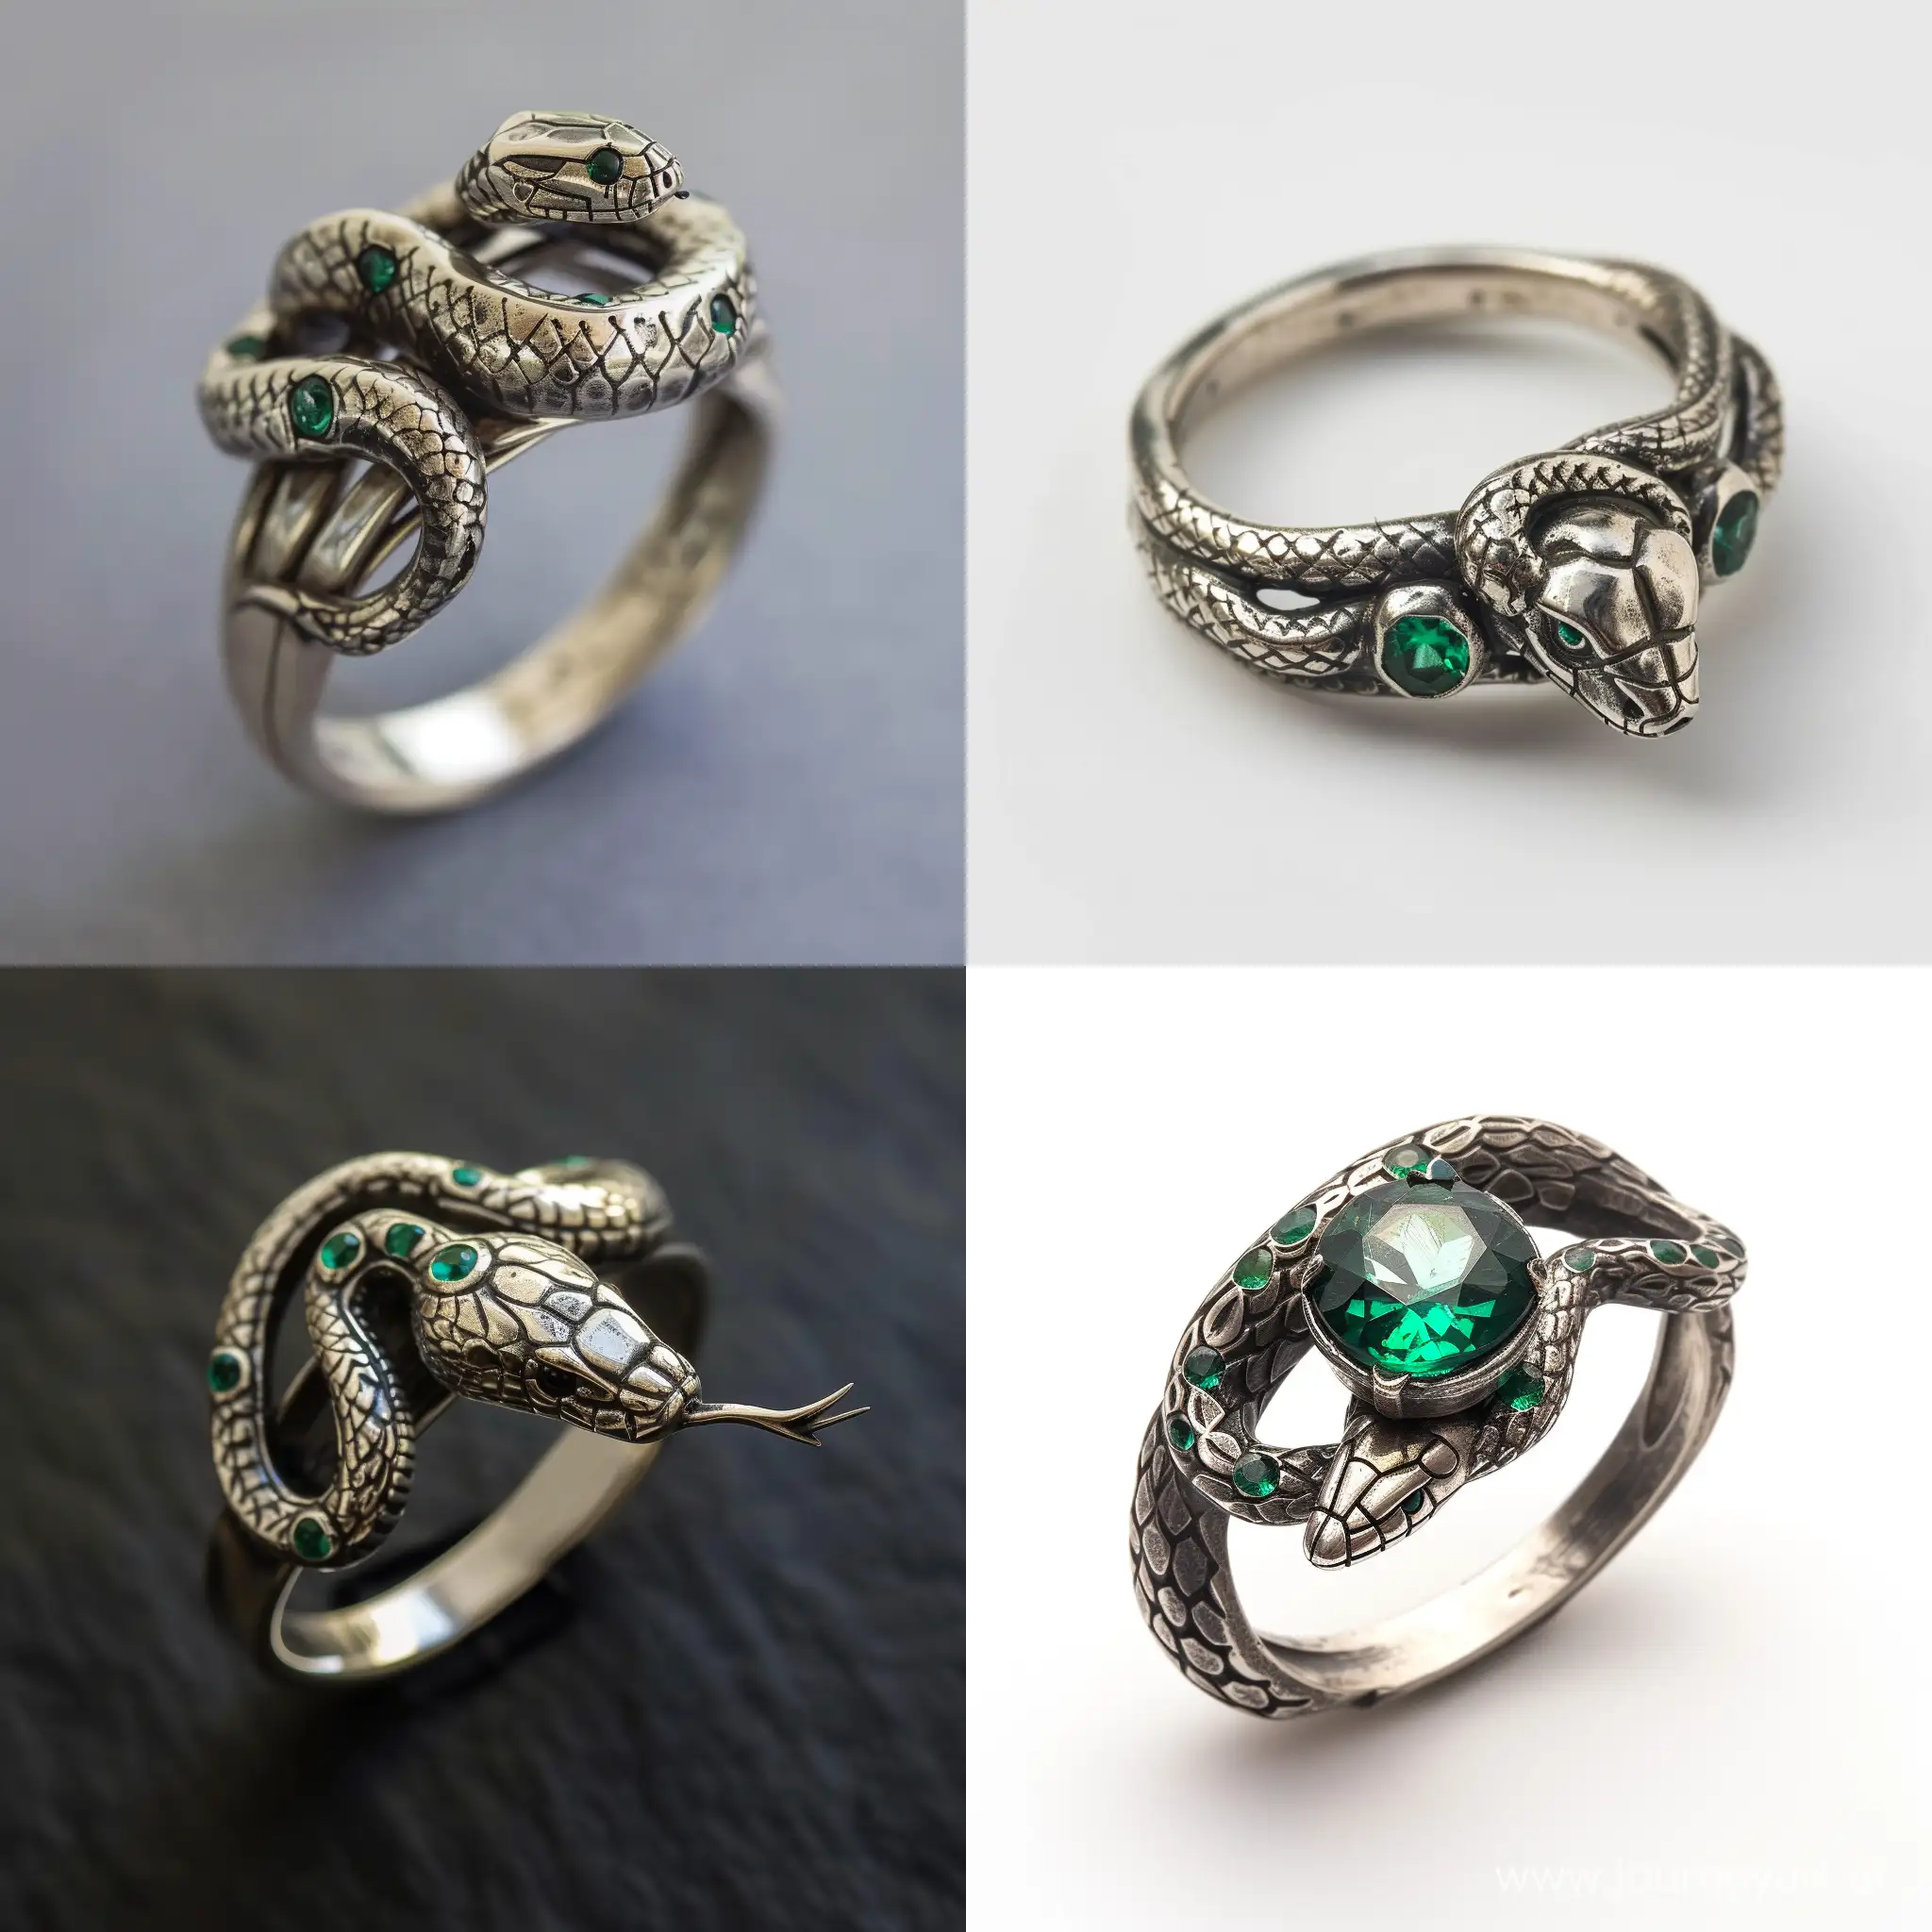 Lord-Voldemorts-Silver-Emerald-Ring-with-Realistic-Snake